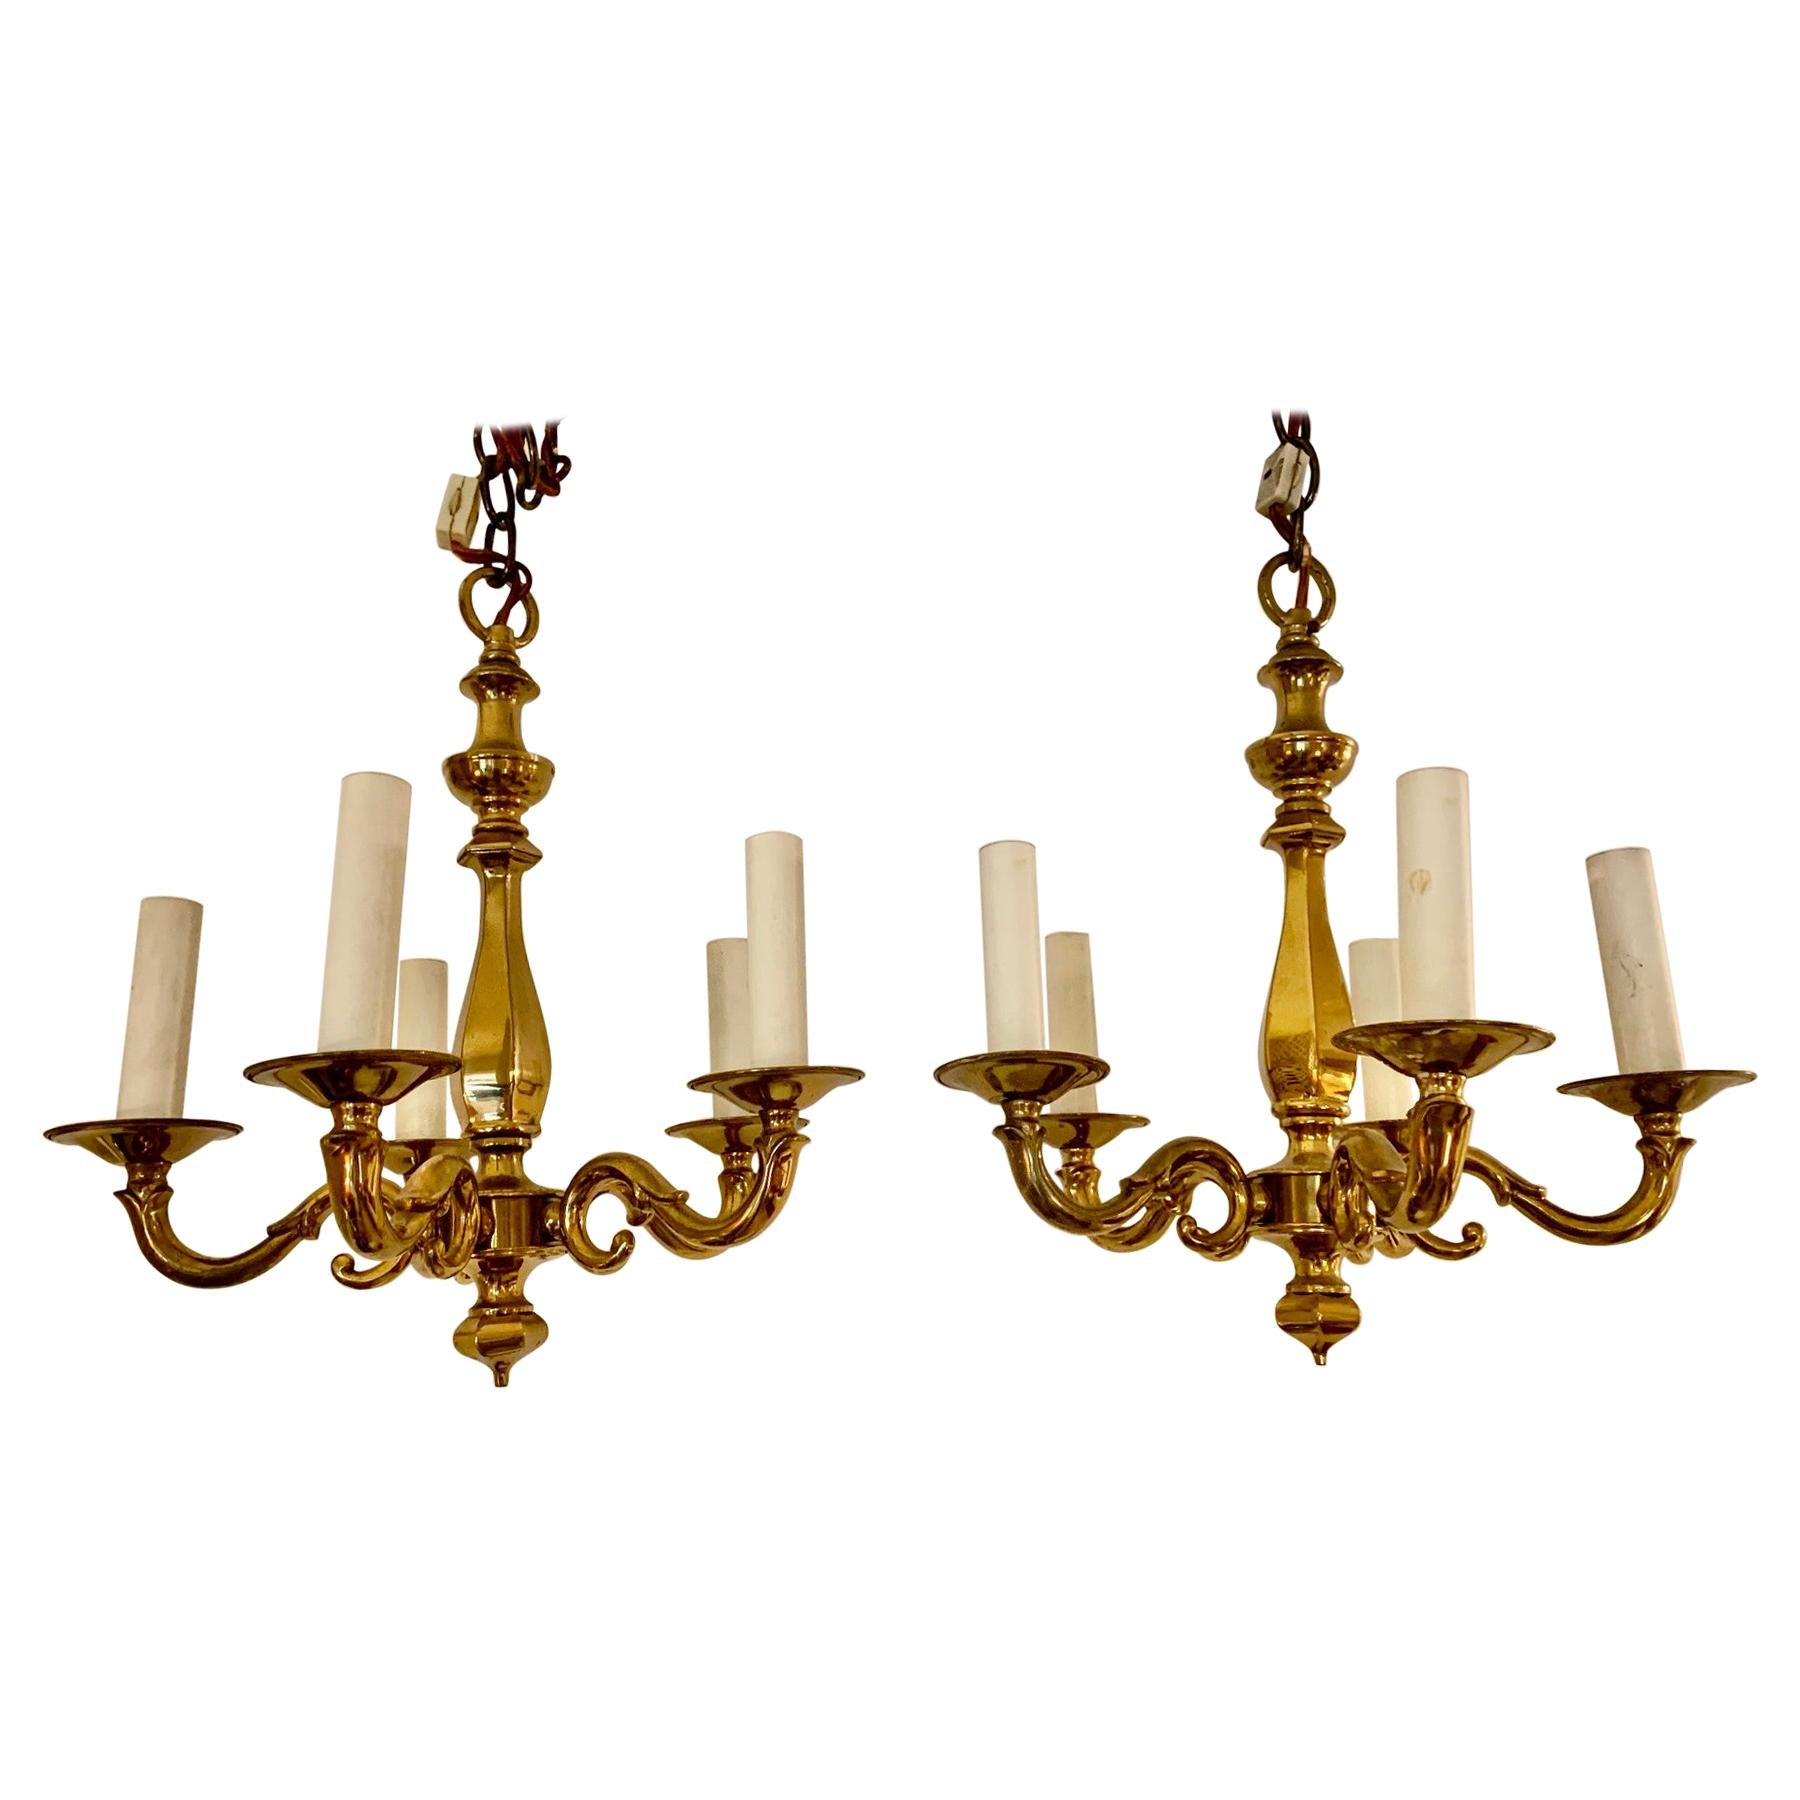 Rare Pair of Antique Classic Solid Brass Small Sized Chandeliers